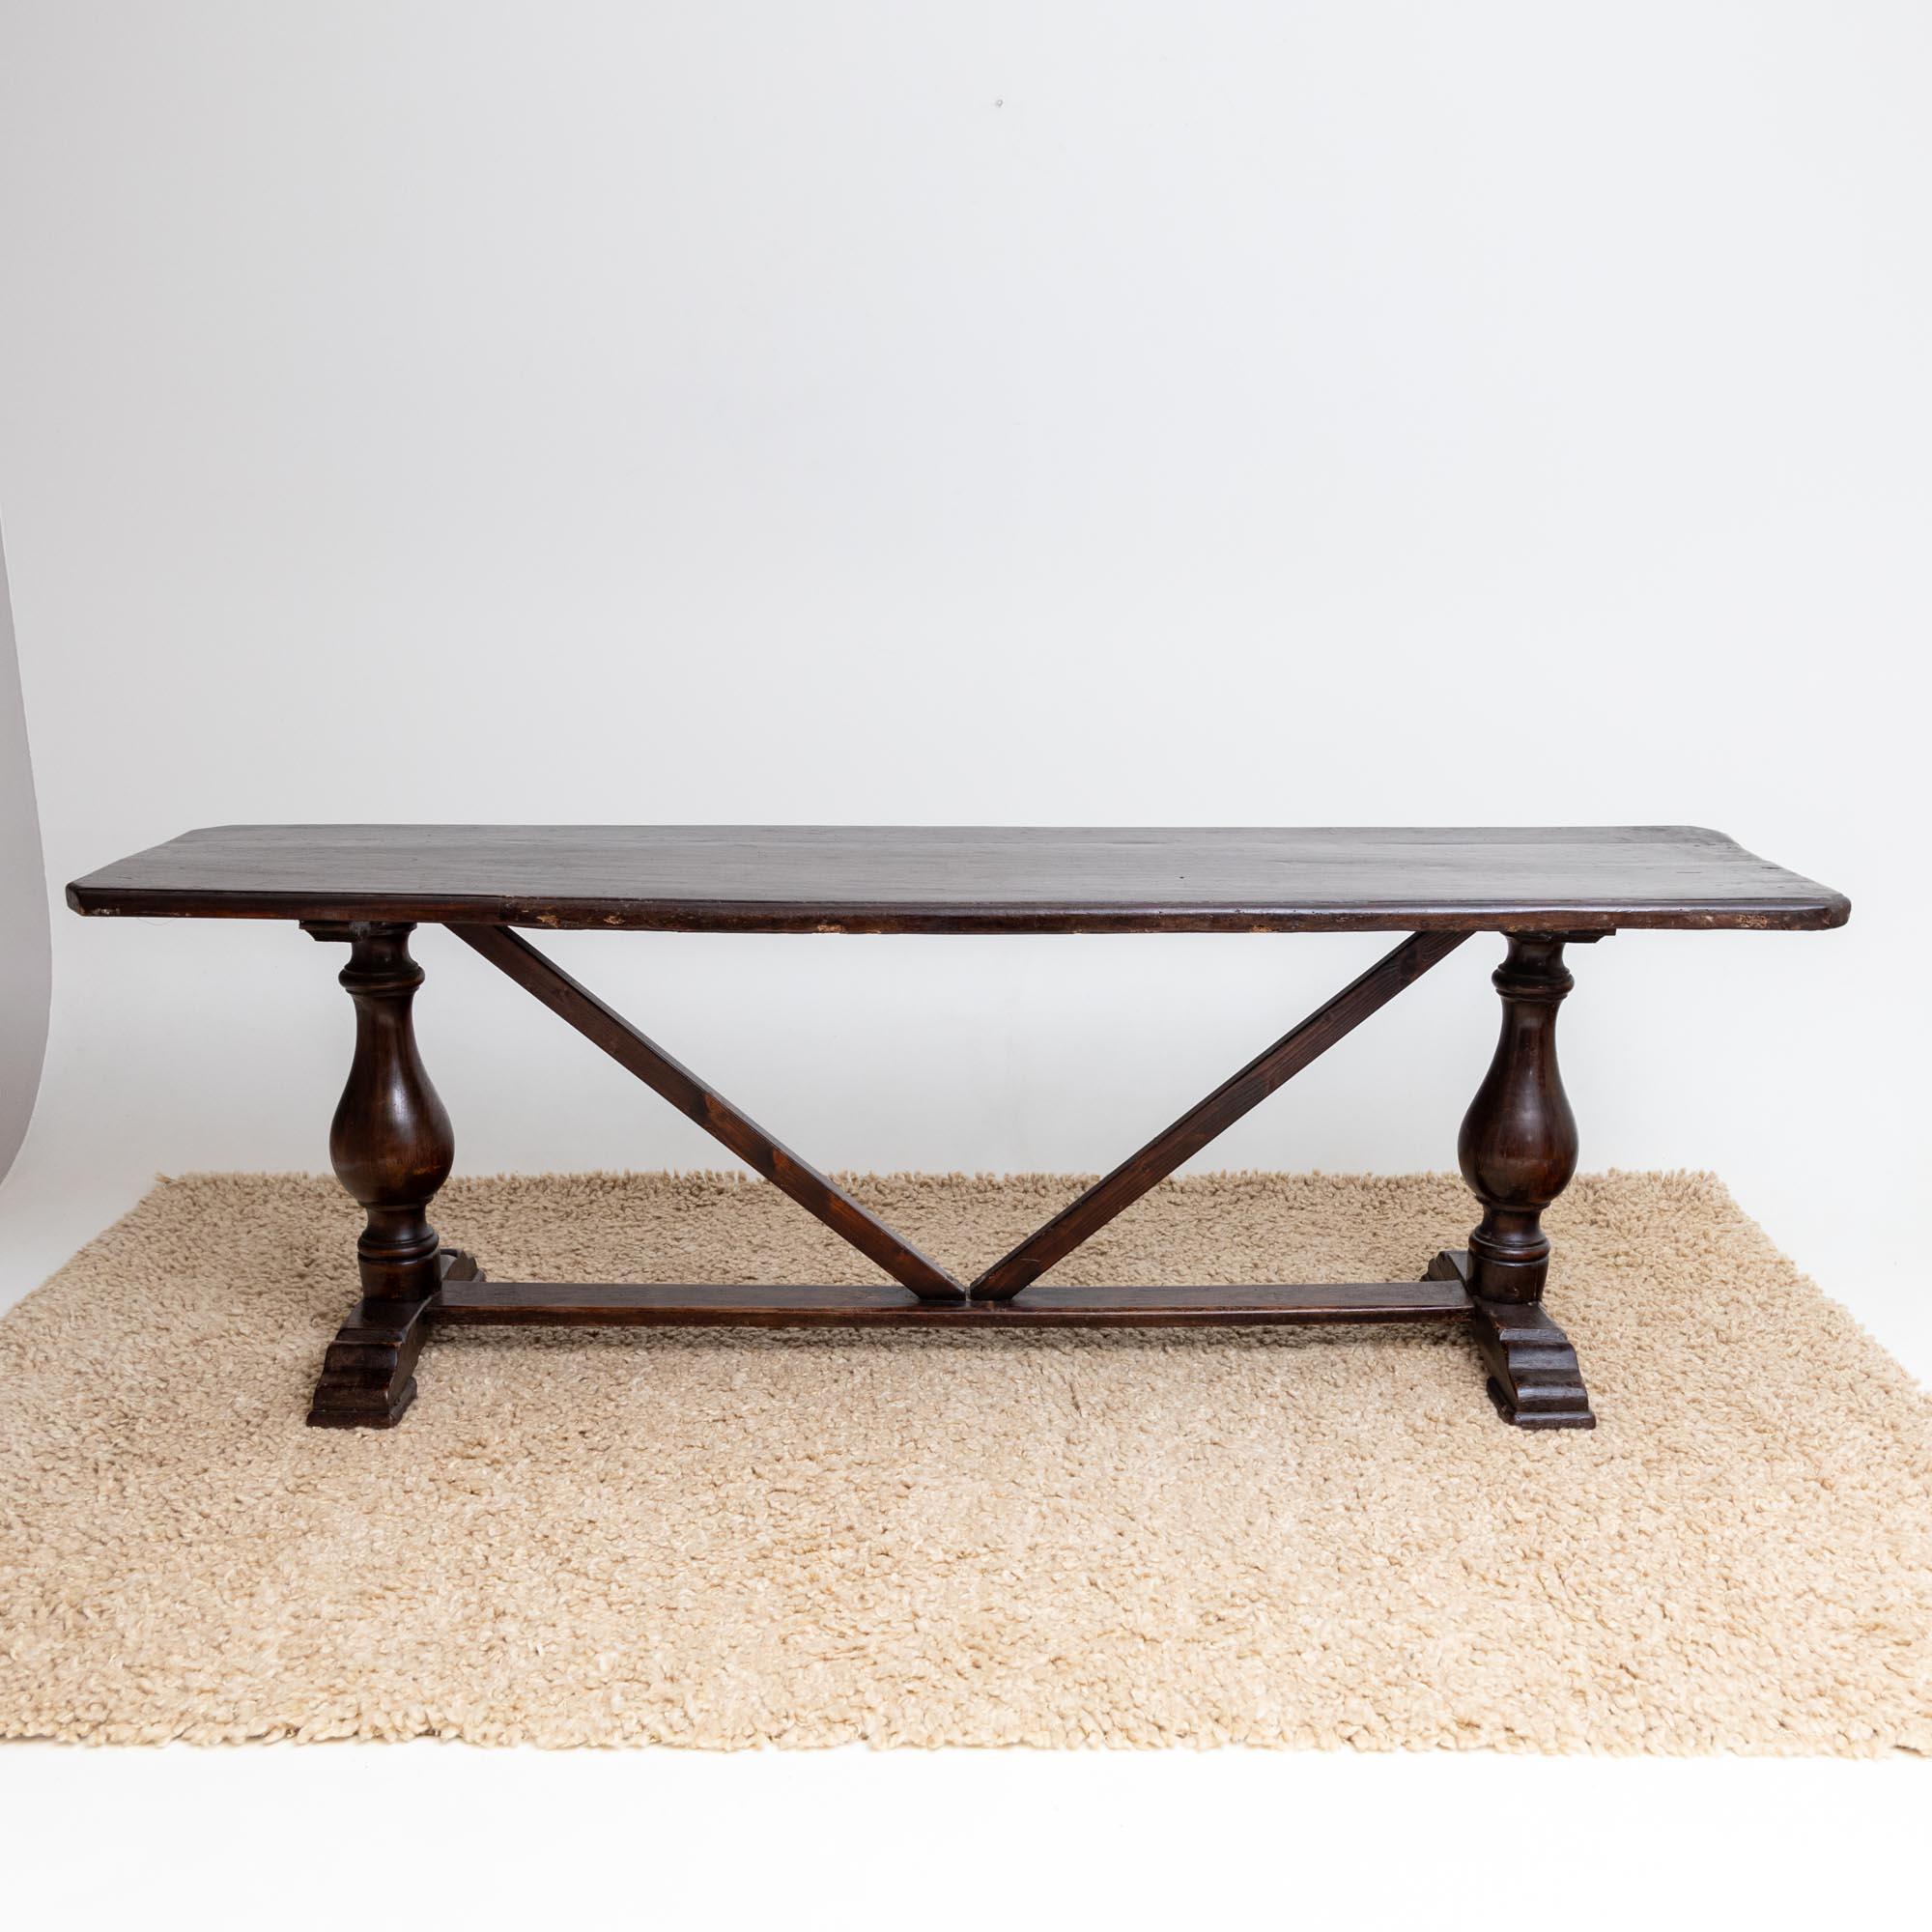 Elevate your dining space with this exquisite large walnut dining table. The table features baluster-shaped legs and a center bar with cross-bracing. Its expansive rectangular table top offers ample room, making it perfect for hosting gatherings or